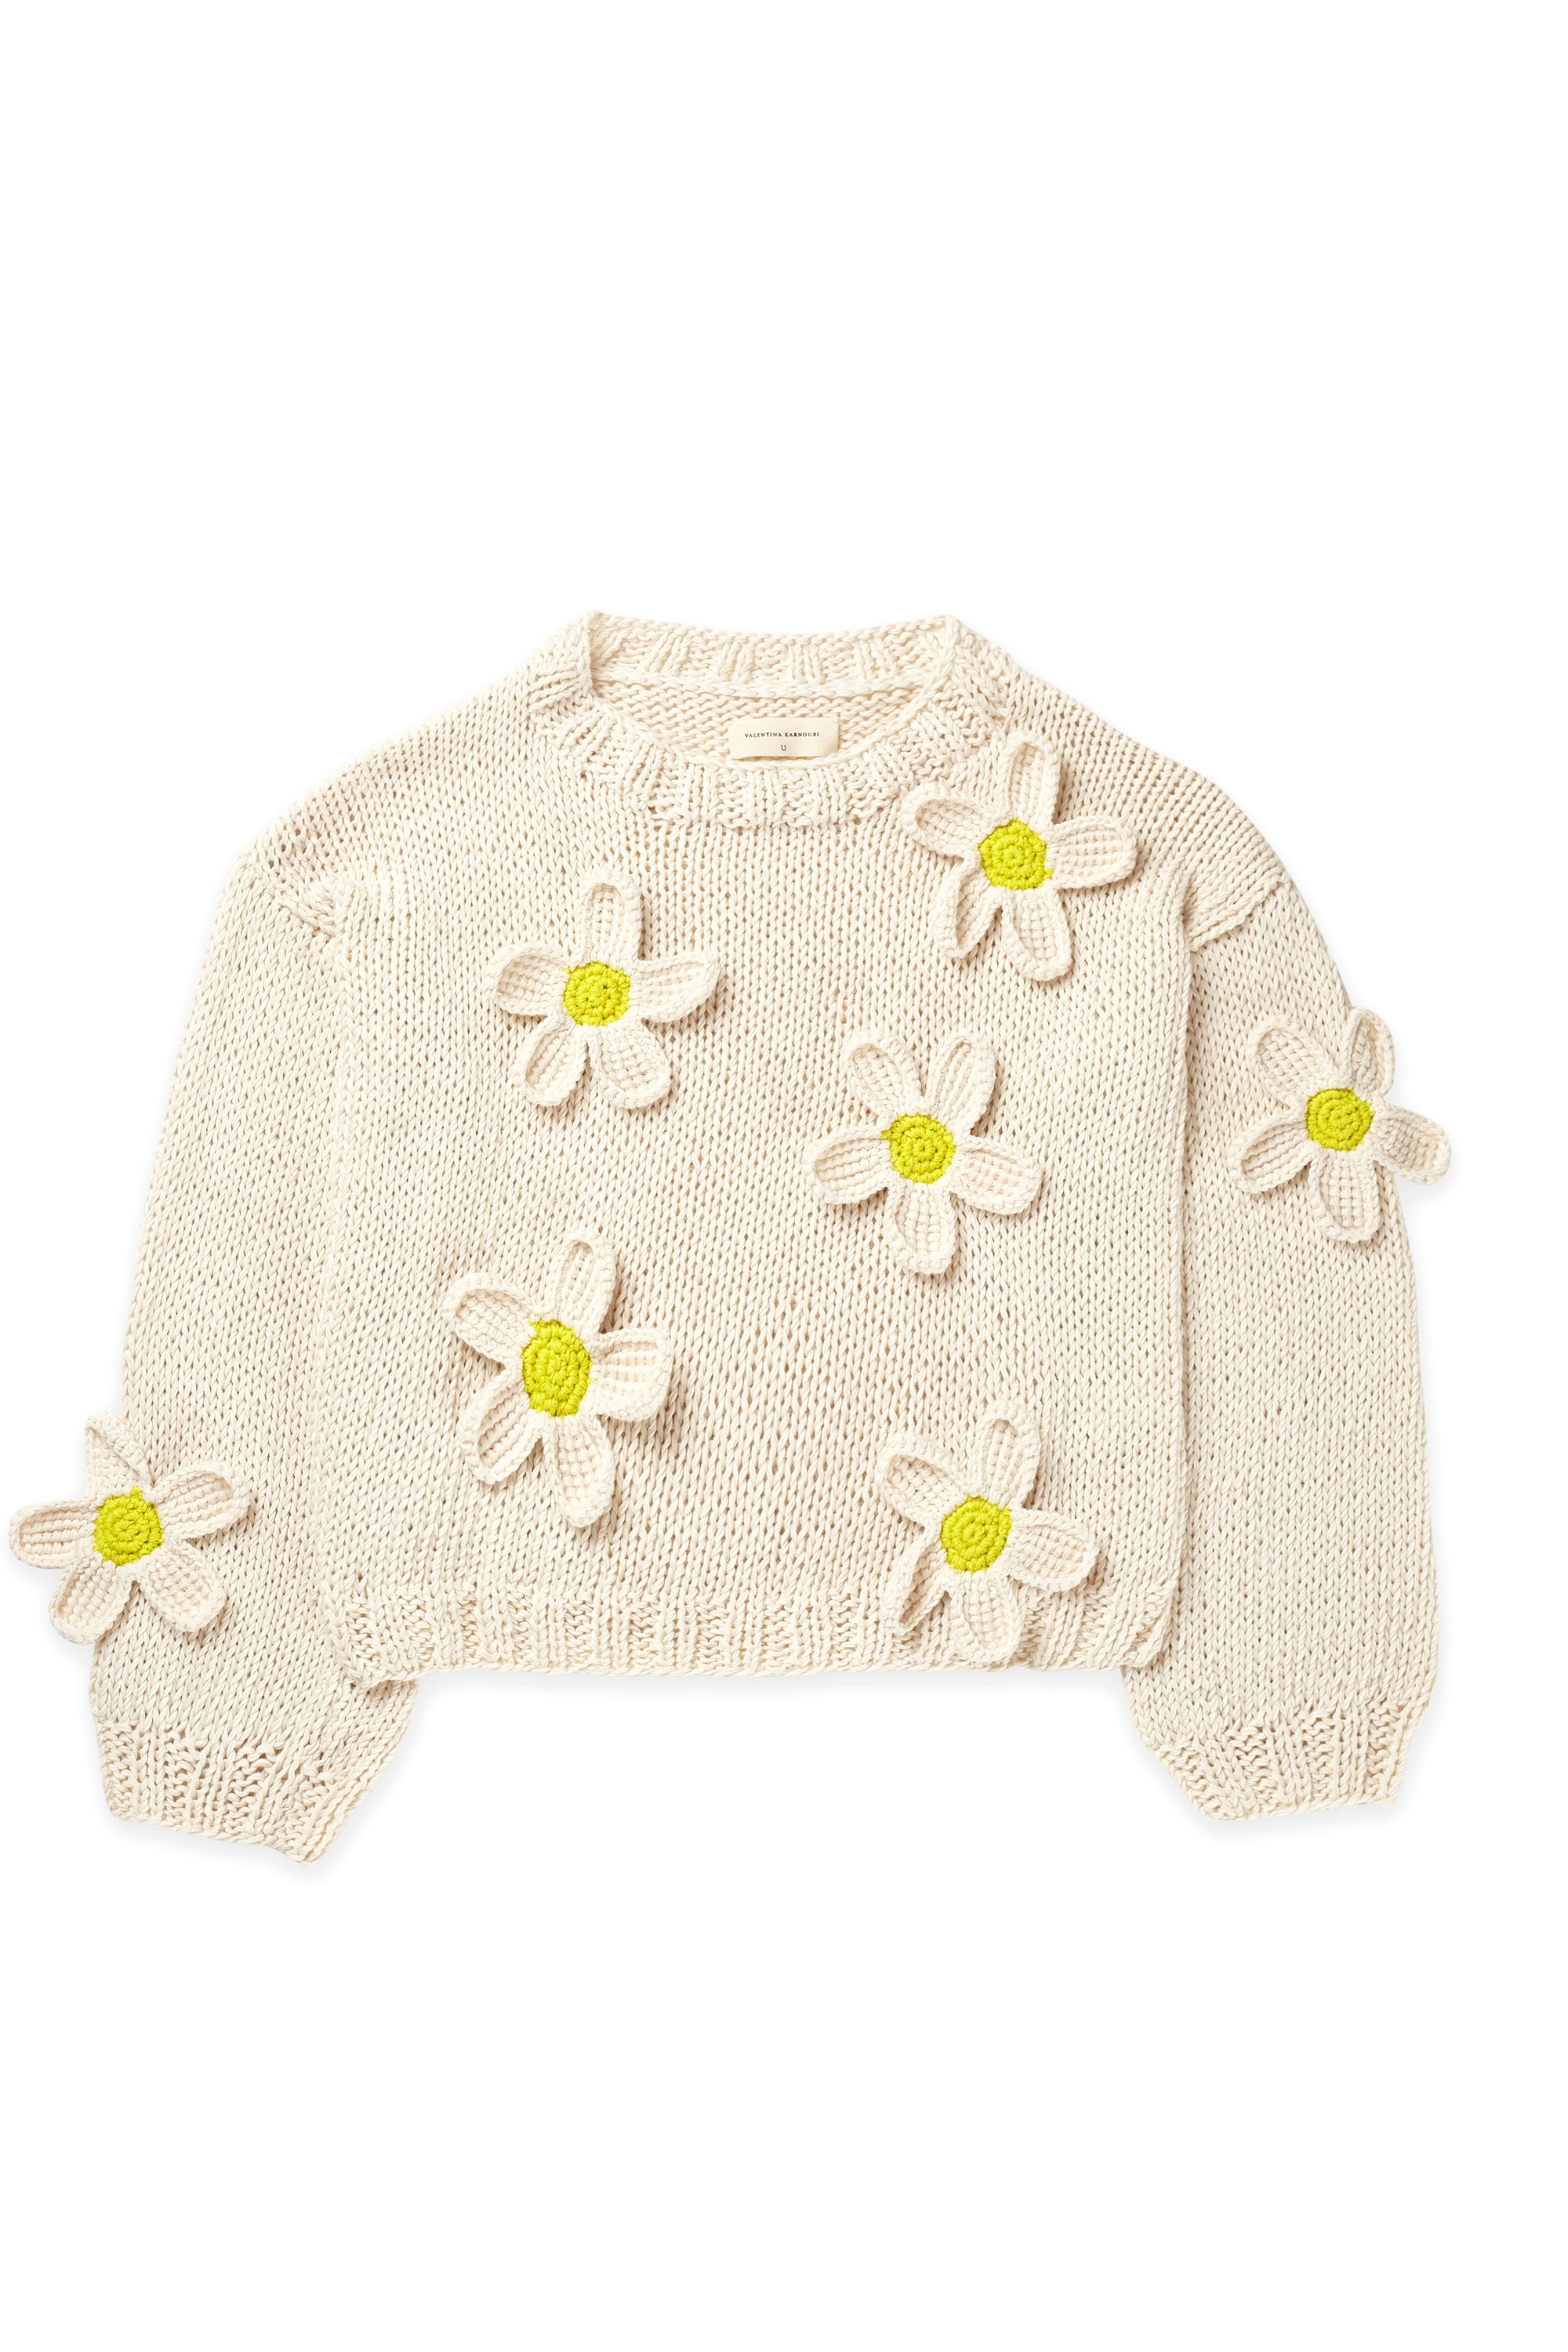 Sweater Poppy natural (pre order)